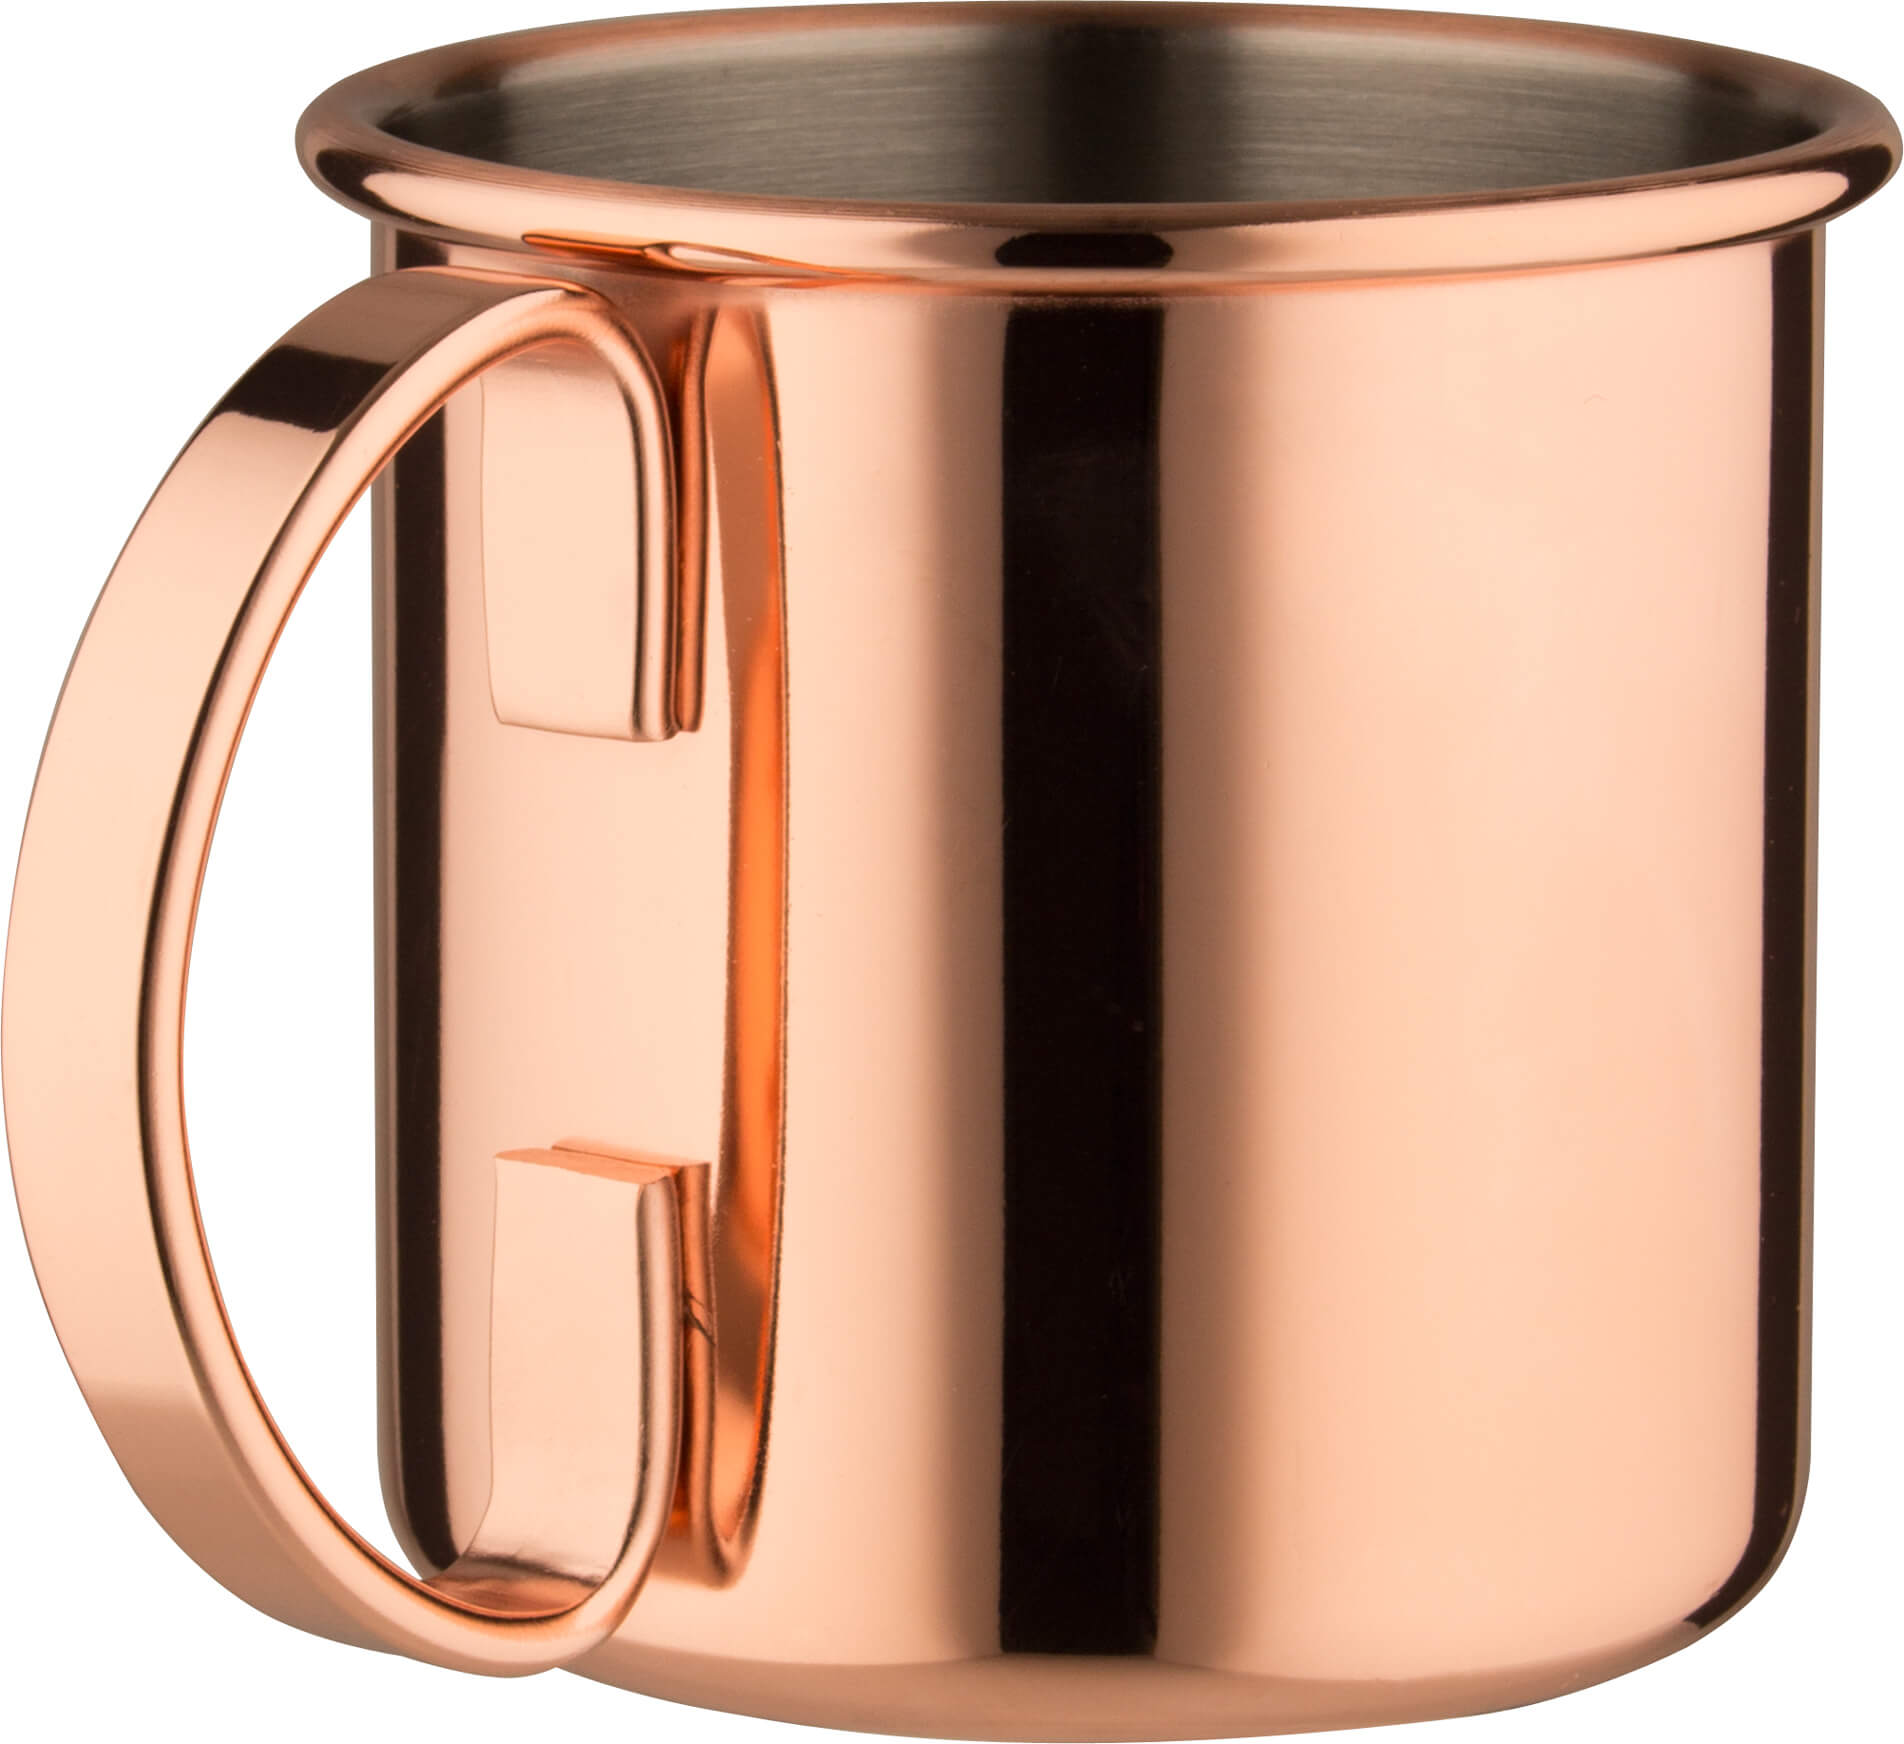 Moscow Mule stainless steel Copper - 500ml